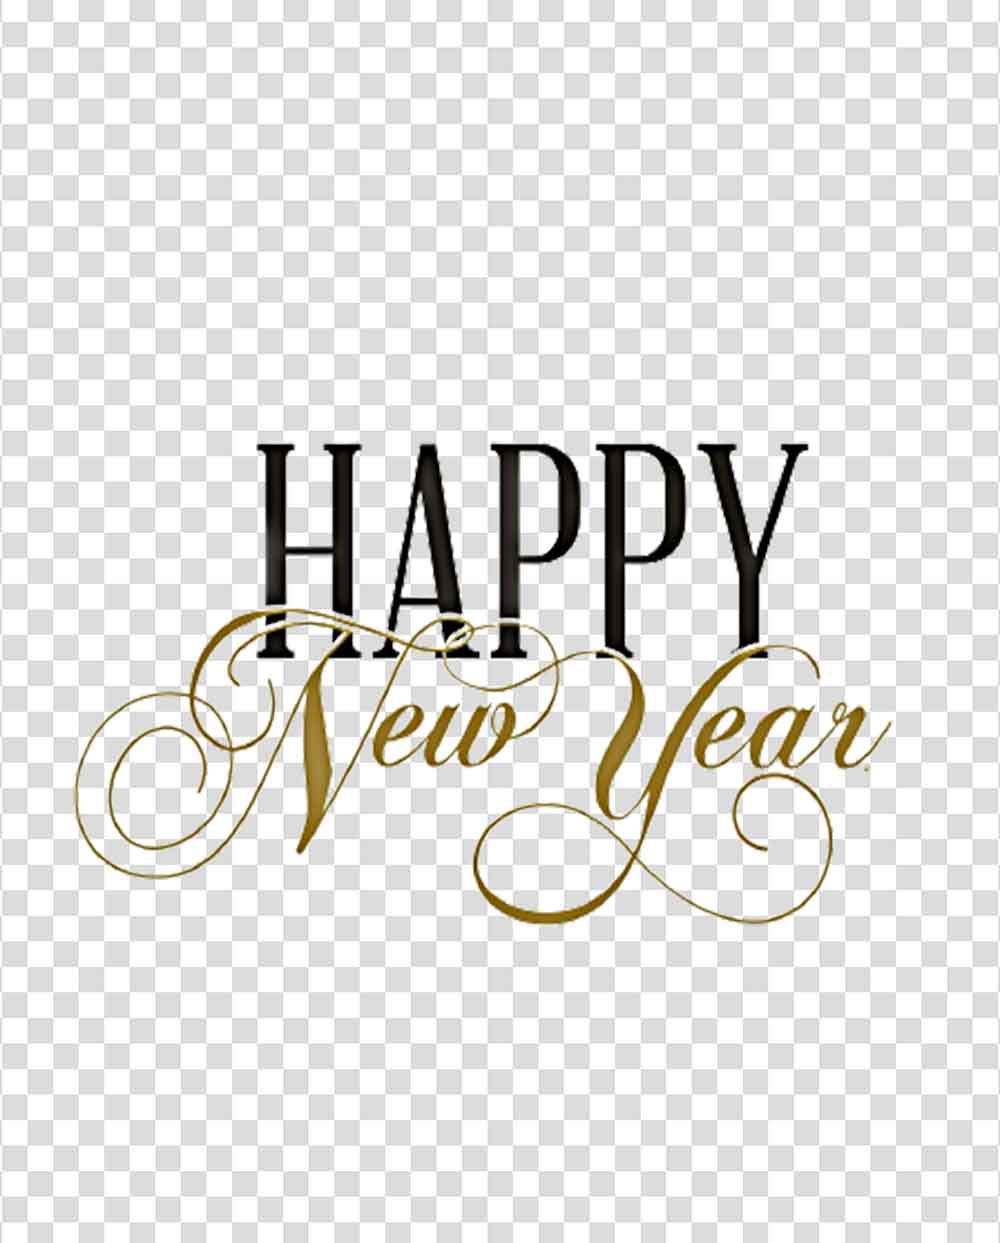 Golden New Year Vector Design Images, Happy New Year 2021 Golden Png  Background Design, Happy New Year Logo 2021, Lunar New Year Png, Free Happy  Chinese New Yea… | Happy new year